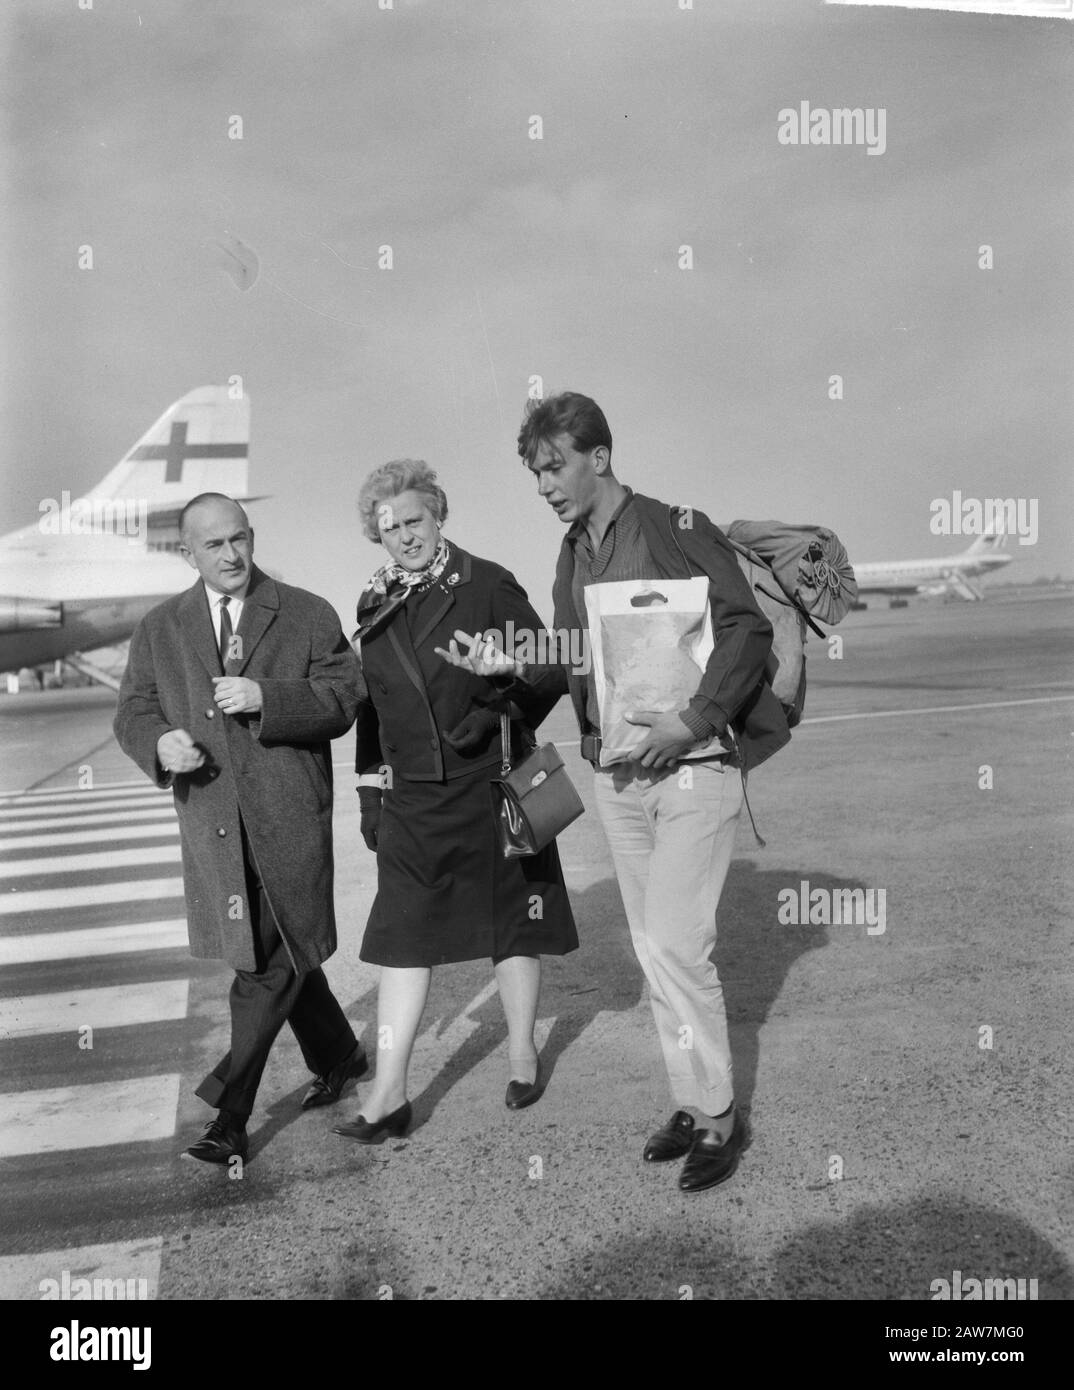 Peter Bax bike to Thailand to his father's grave to visit. Mother and son at the airport Date: October 23, 1963 Keywords: visit, bicycles, mothers, fathers, sons Stock Photo